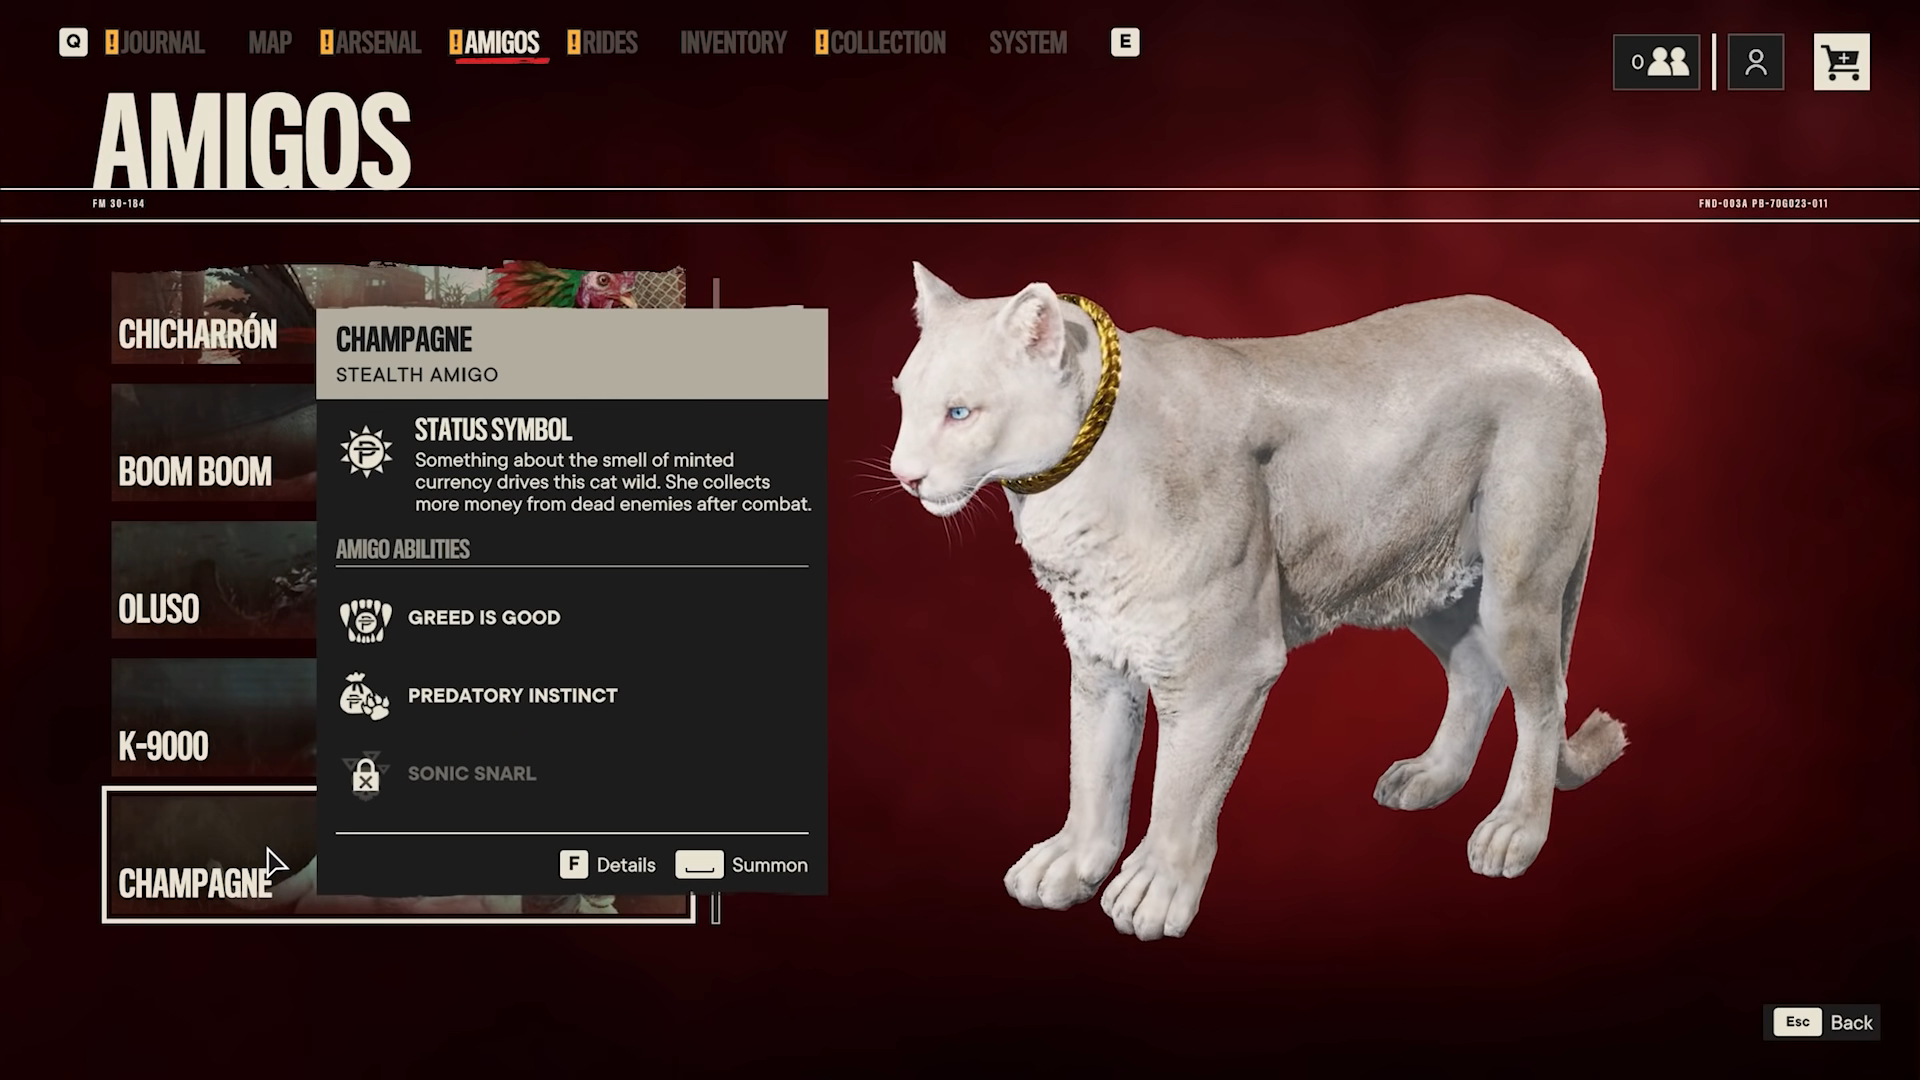 A white panther named Champagne.